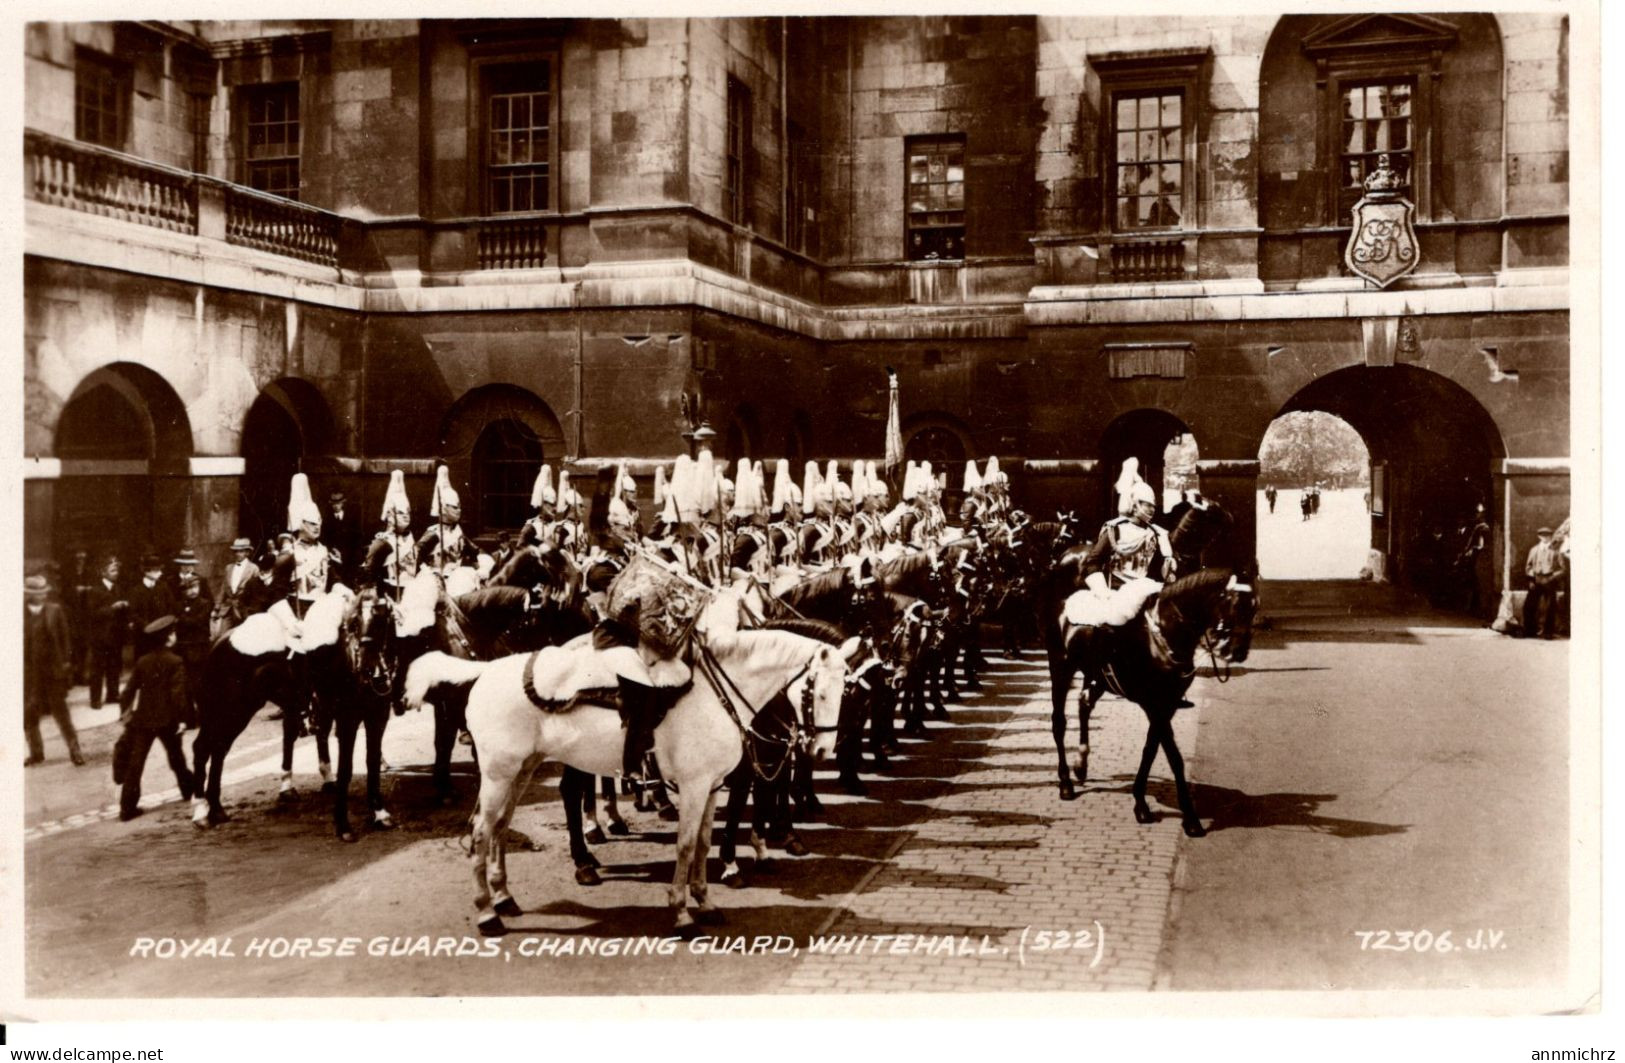 LONDON ROYAL HORSE GUARDS CHANGING GUARDS - Whitehall